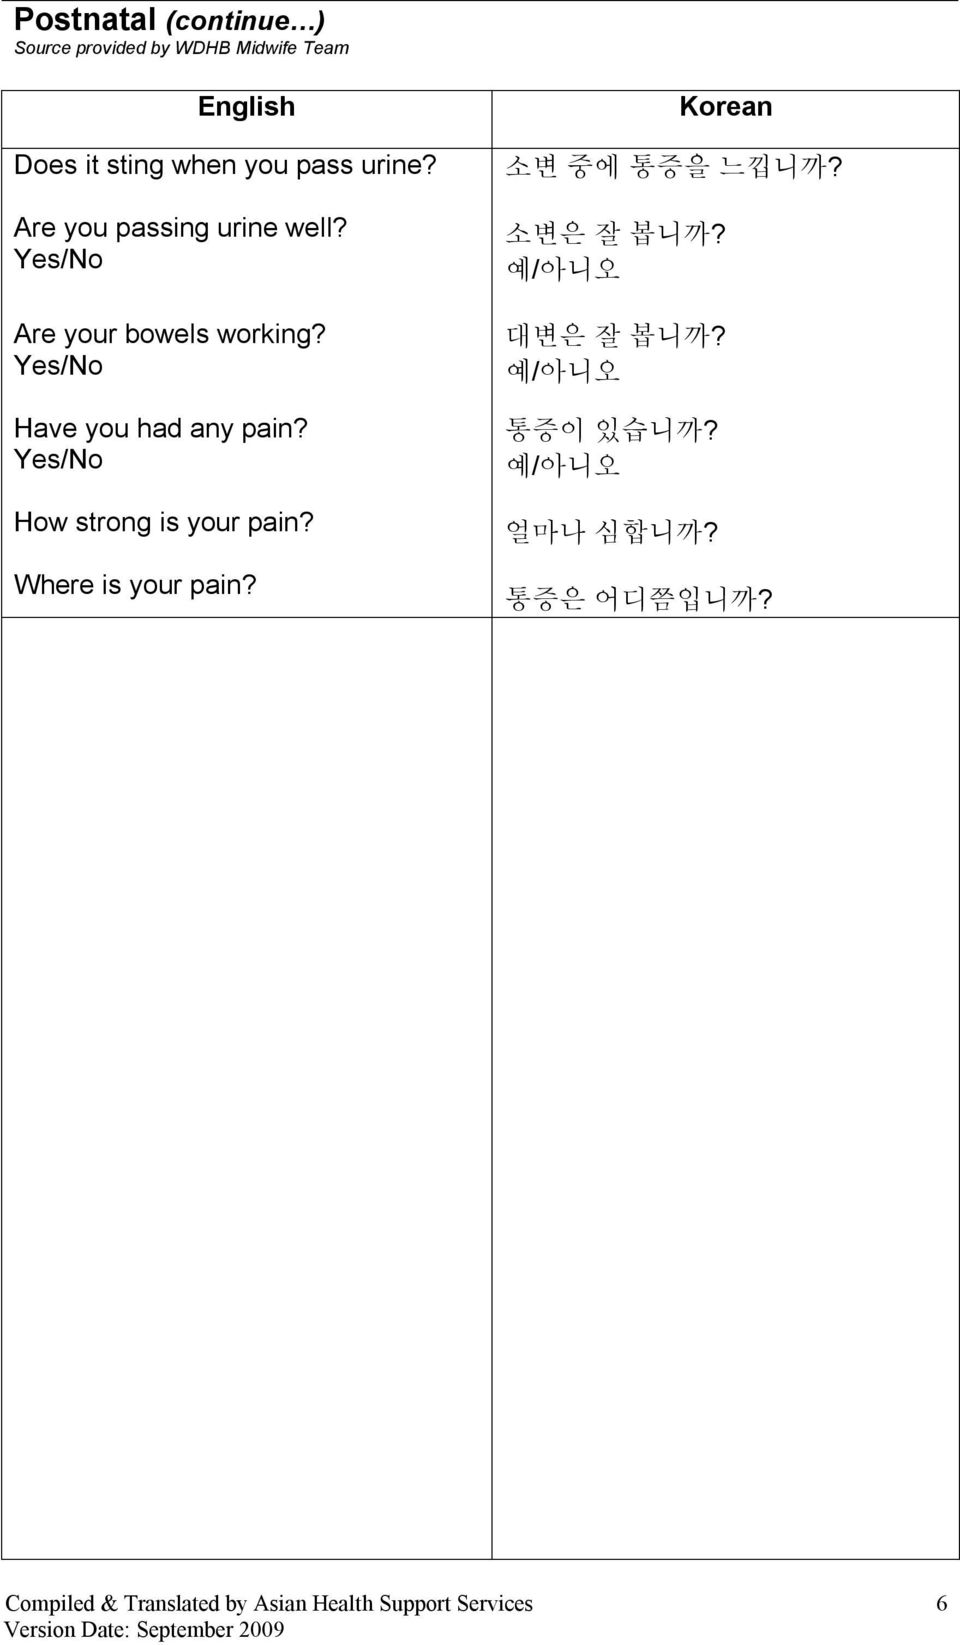 How strong is your pain? Where is your pain? 소변 중에 통증을 느낍니까? 소변은 잘 봅니까?